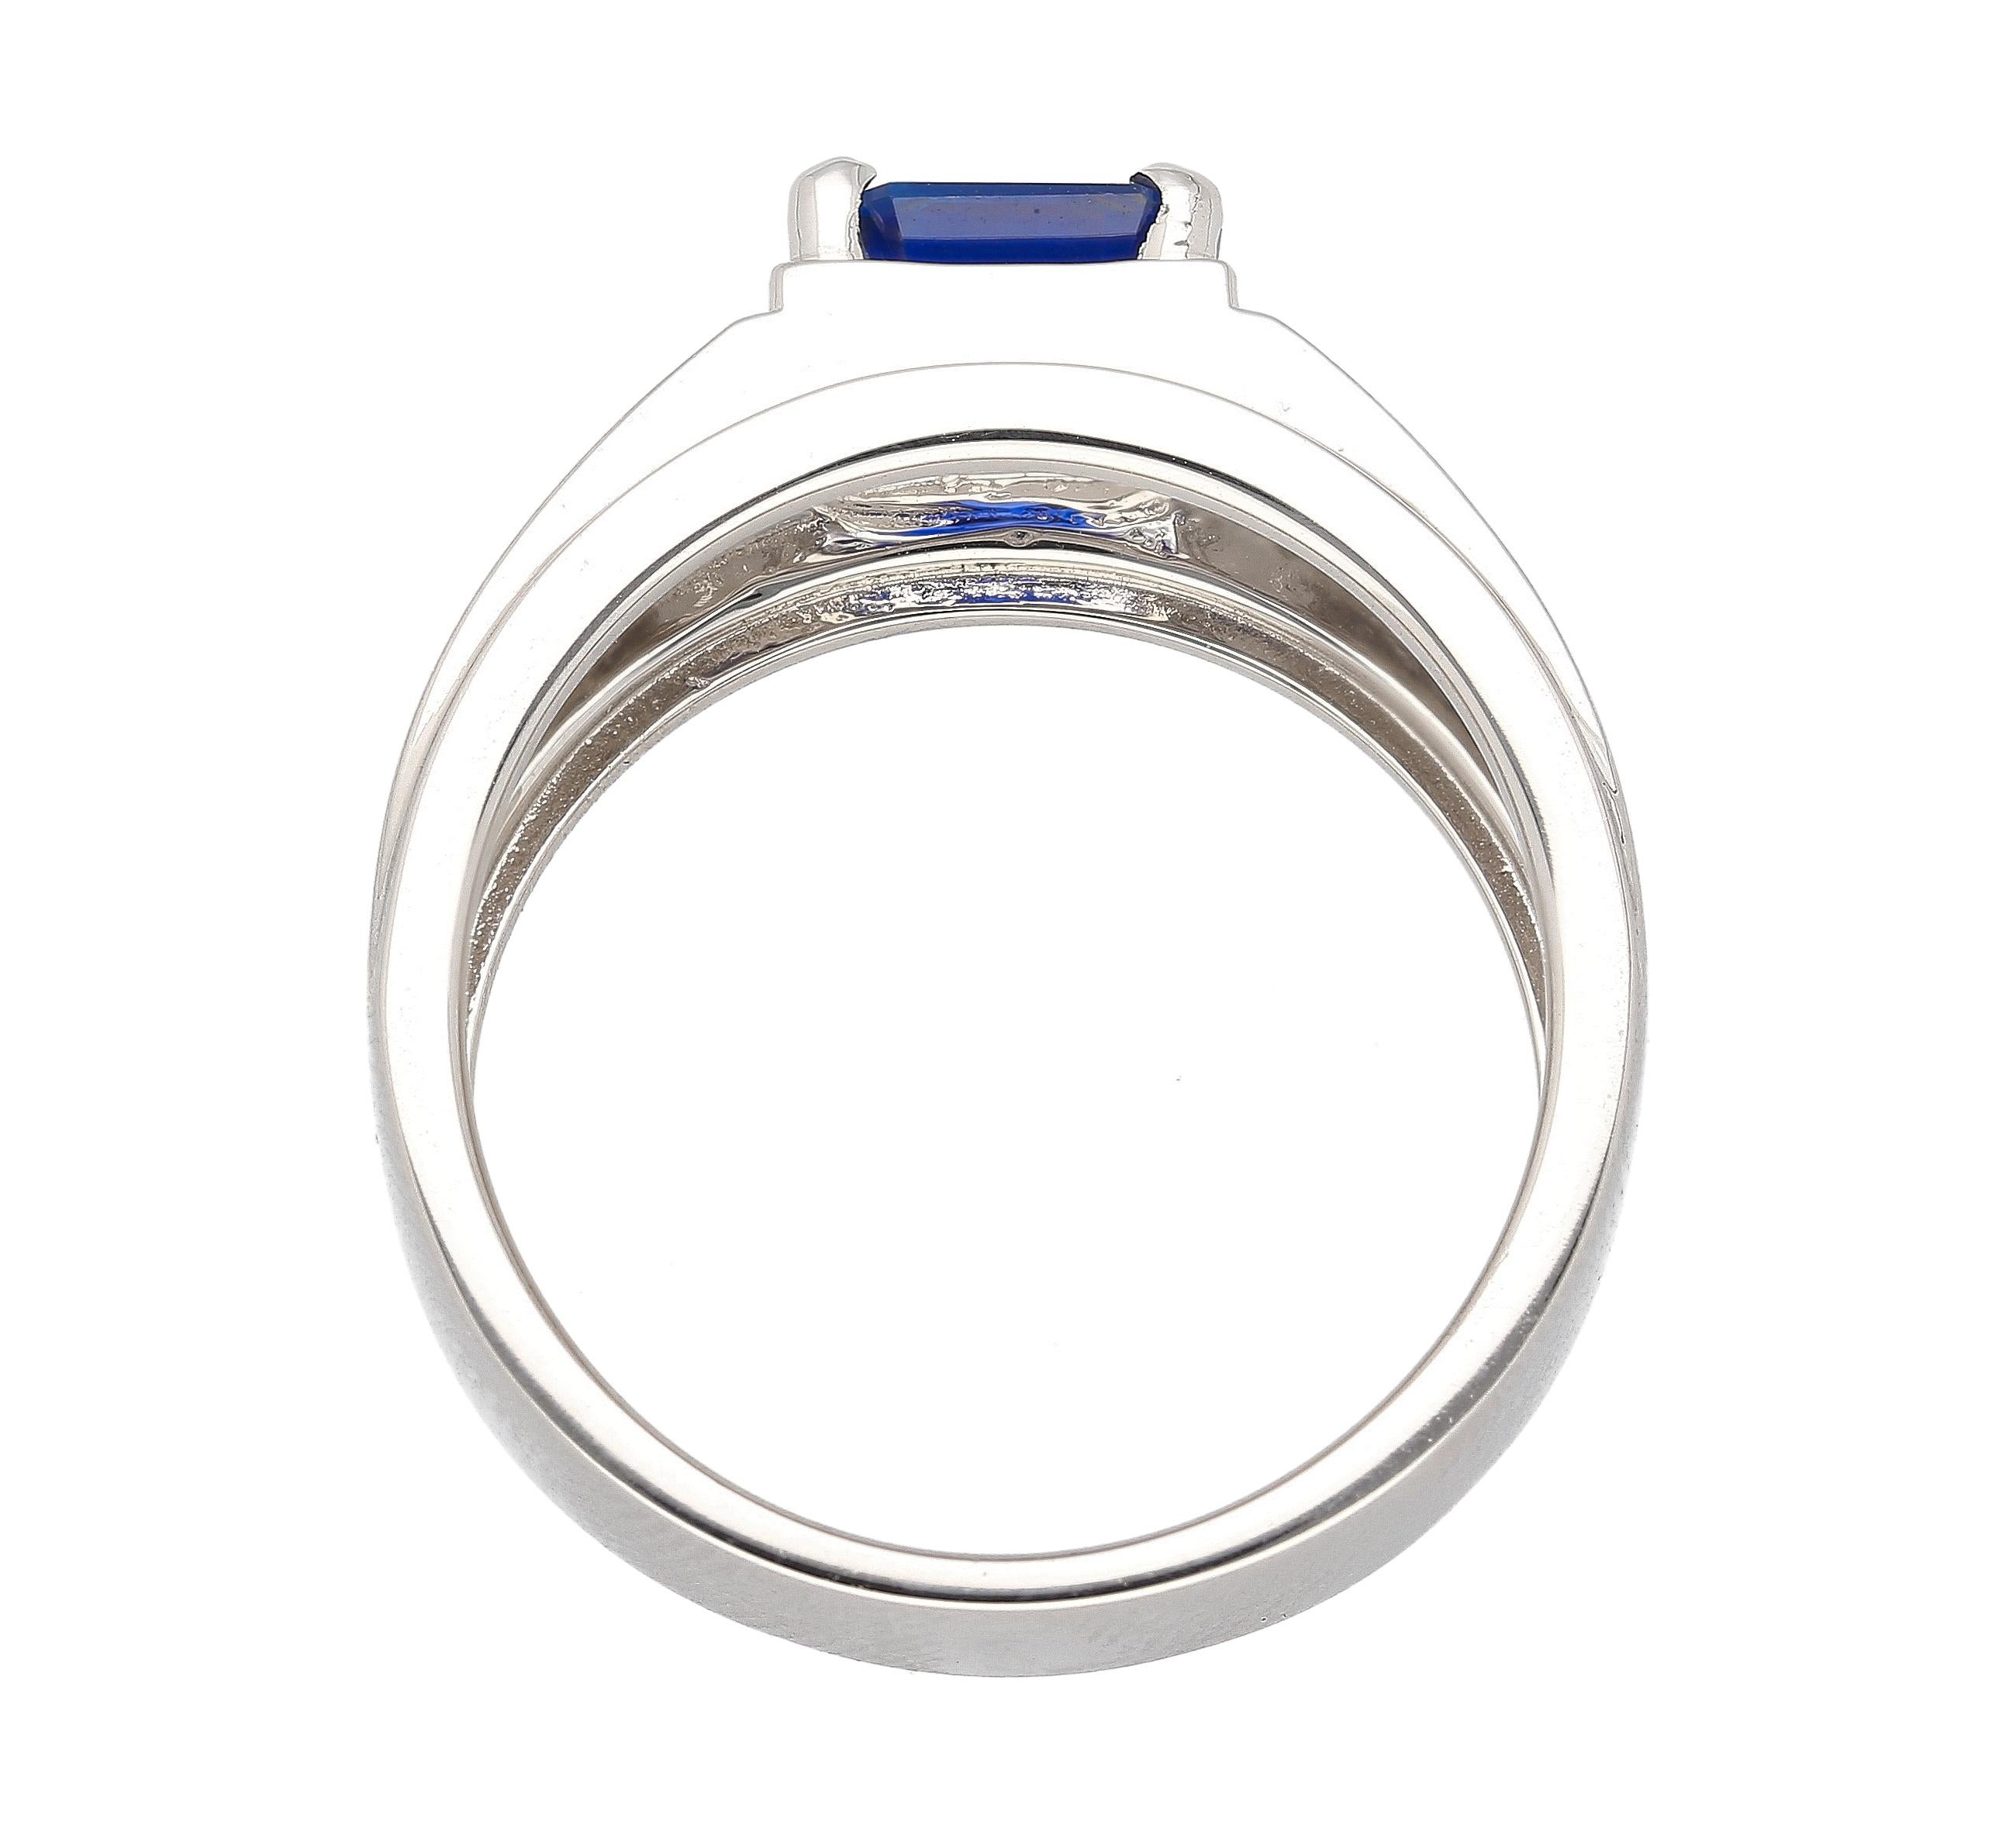 GIA Certified Sri Lanka Blue Sapphire Men's Ring. 

This men's ring features a prong set natural blue sapphire with a carat weight of 2.23. The sapphire is octagonal-cut and originates from Sri Lanka. It is GIA certified. A showstopping piece, ideal